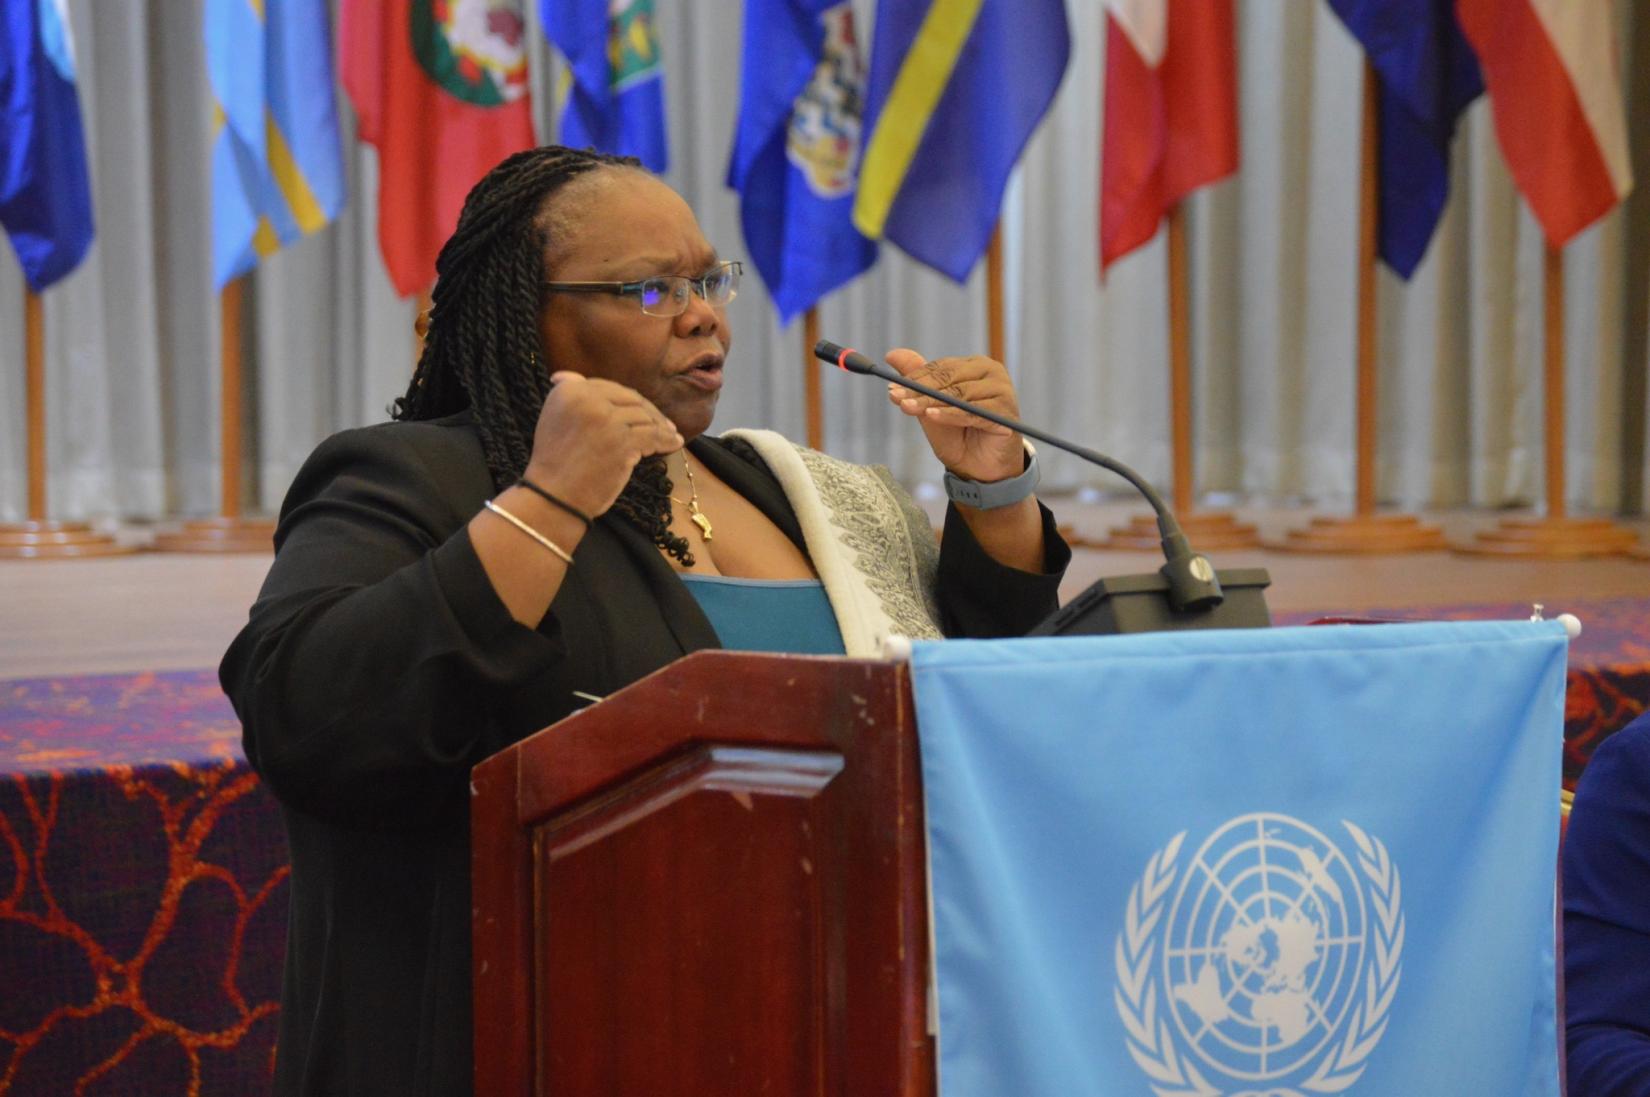 Diane Quarless, Director of the UN Economic Commission for Latin America and the Caribbean (ECLAC) Subregional Headquarters for the Caribbean addresses the the 21st Meeting of the Monitoring Committee of the Caribbean Development and Cooperation Committee (CDCC) held in Port-of-Spain, Trinidad and Tobago.